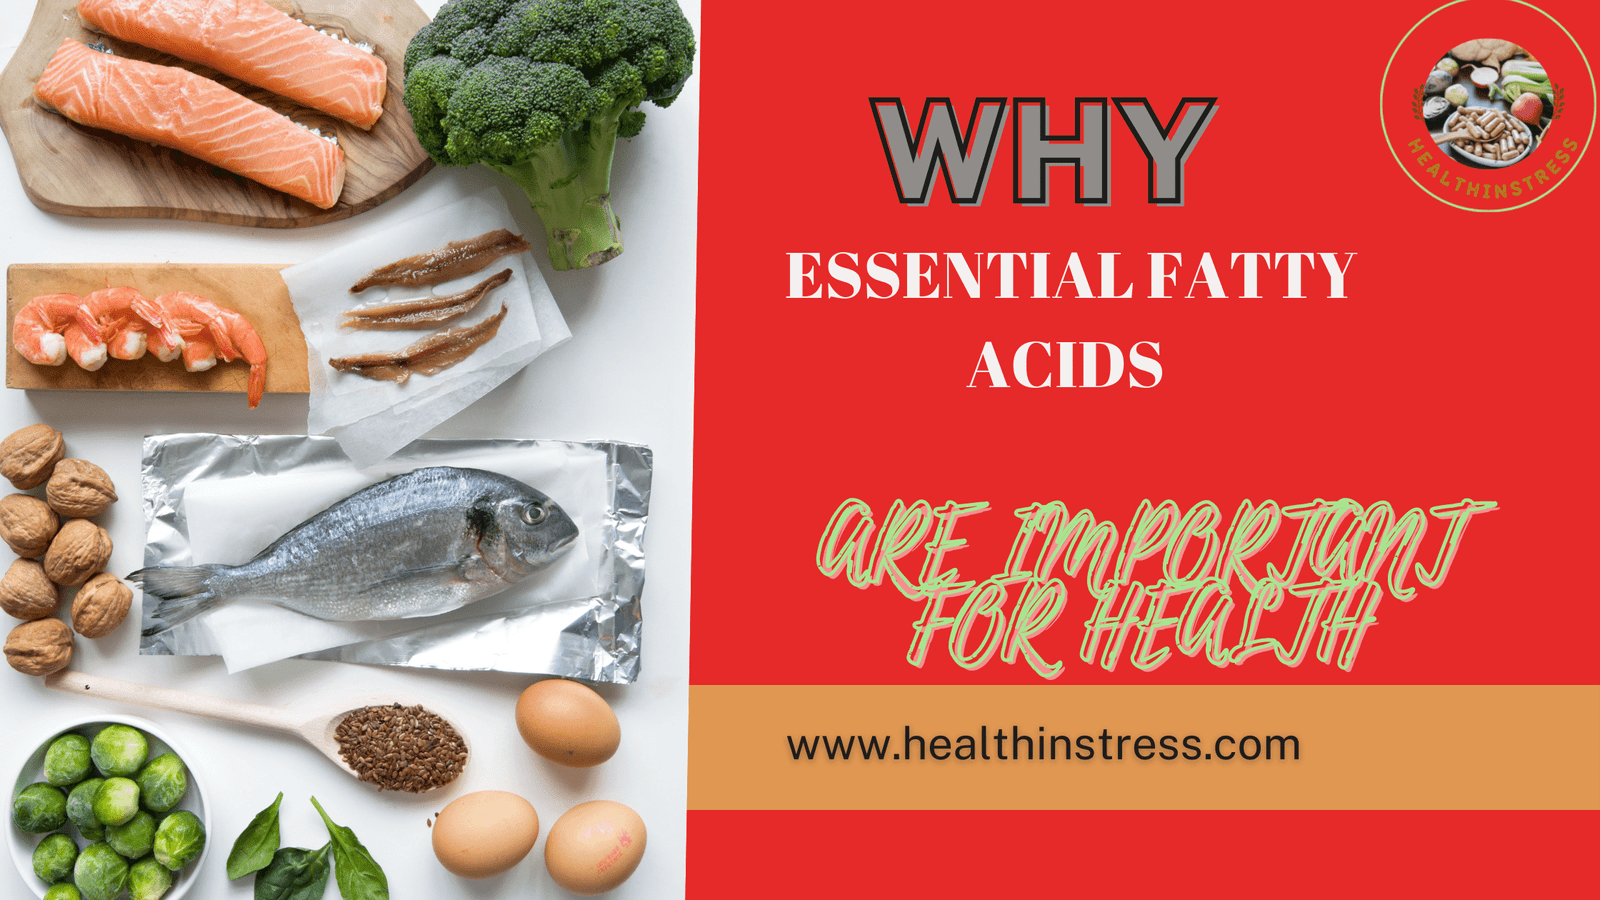 You are currently viewing WHY ESSENTIAL FATTY ACIDS ARE IMPORTANT FOR HEALTH